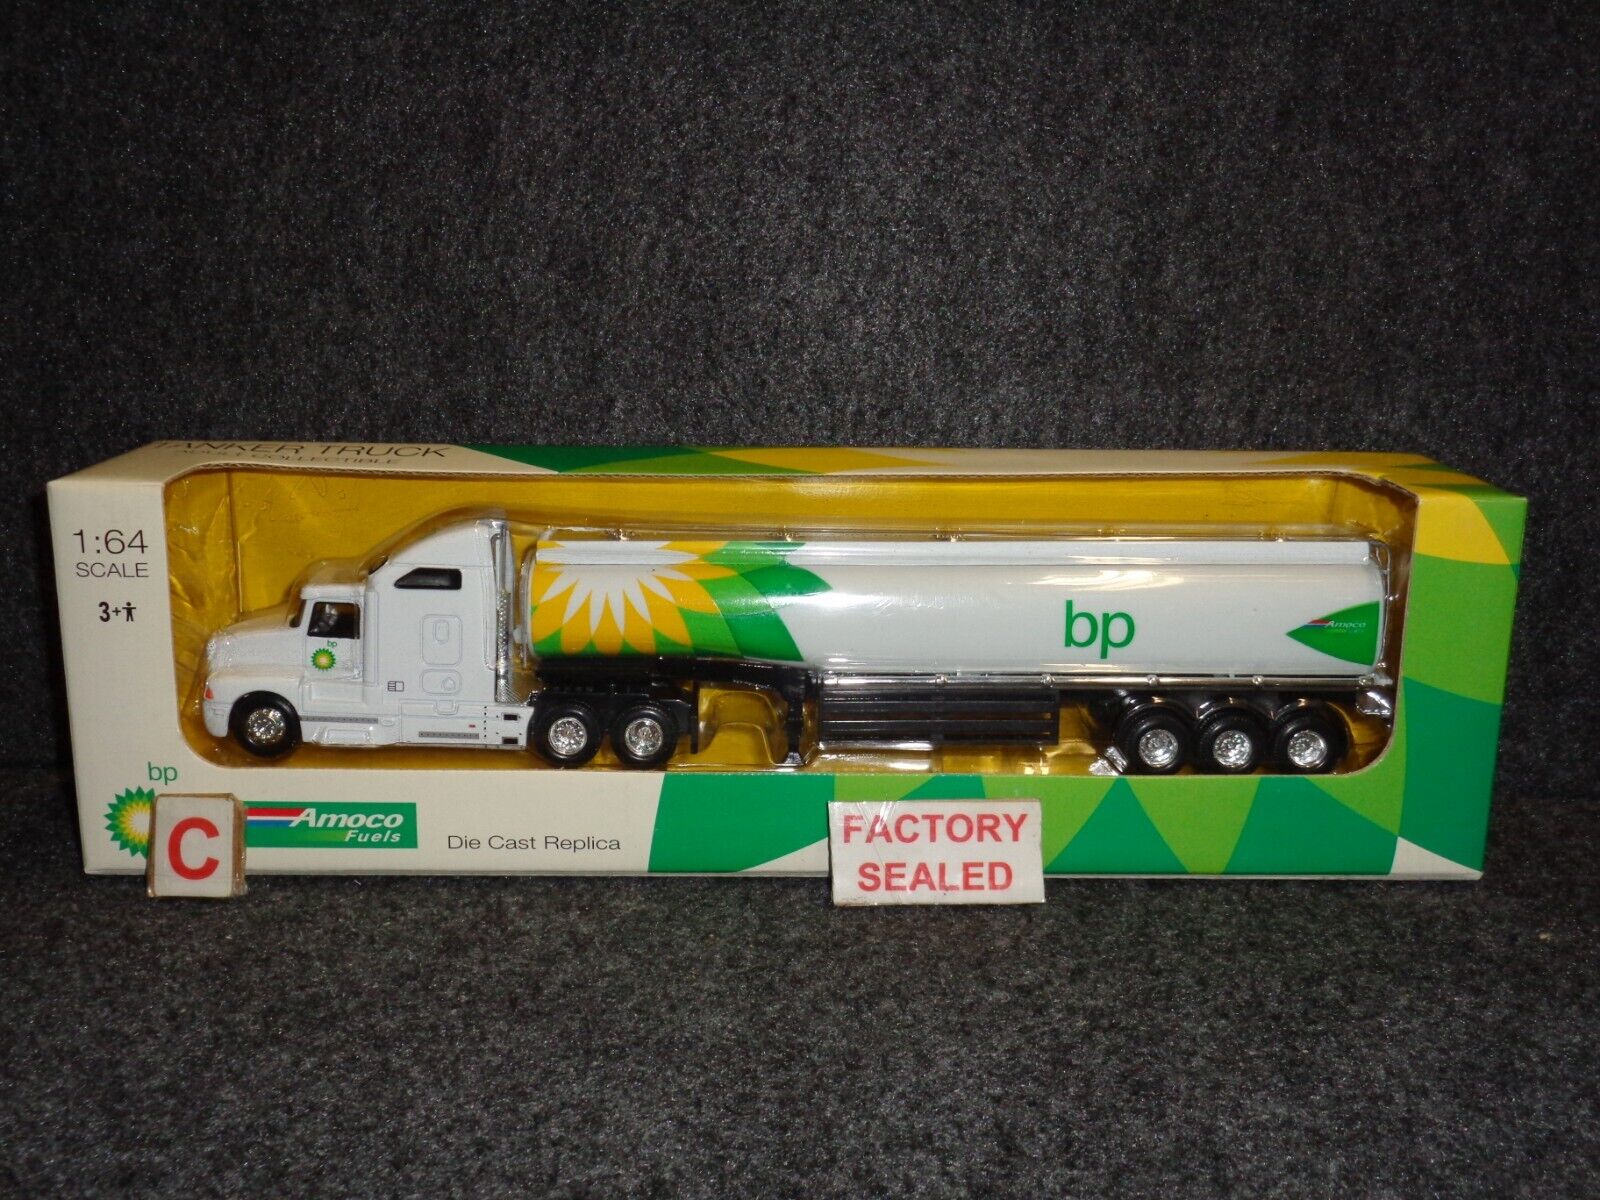 BP Tanker Truck with Sleeper Cab